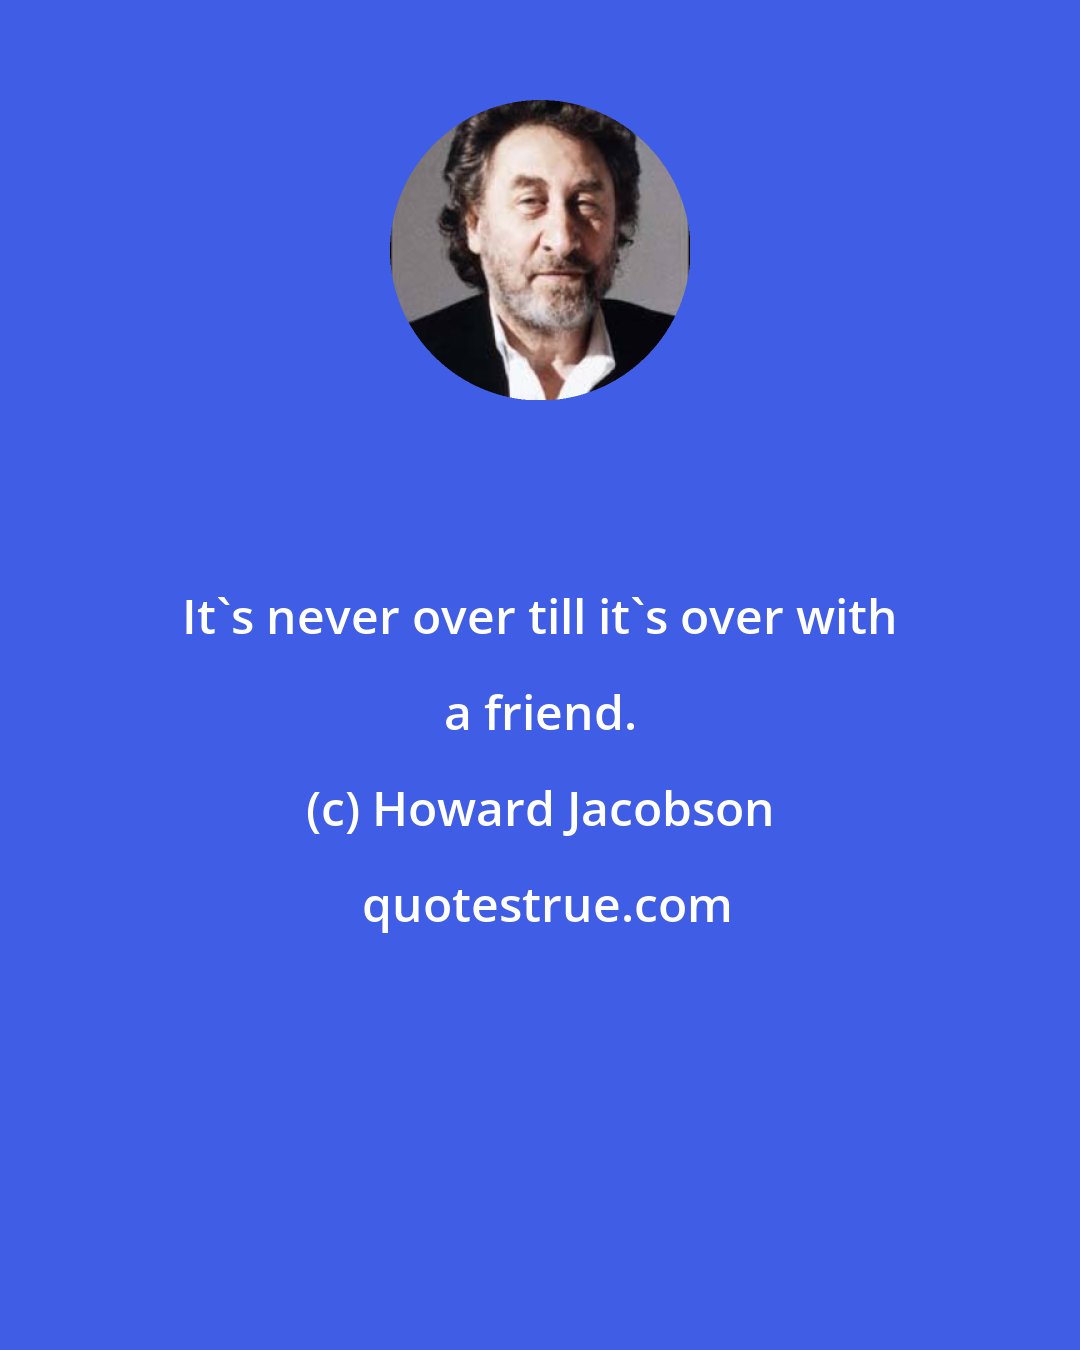 Howard Jacobson: It's never over till it's over with a friend.